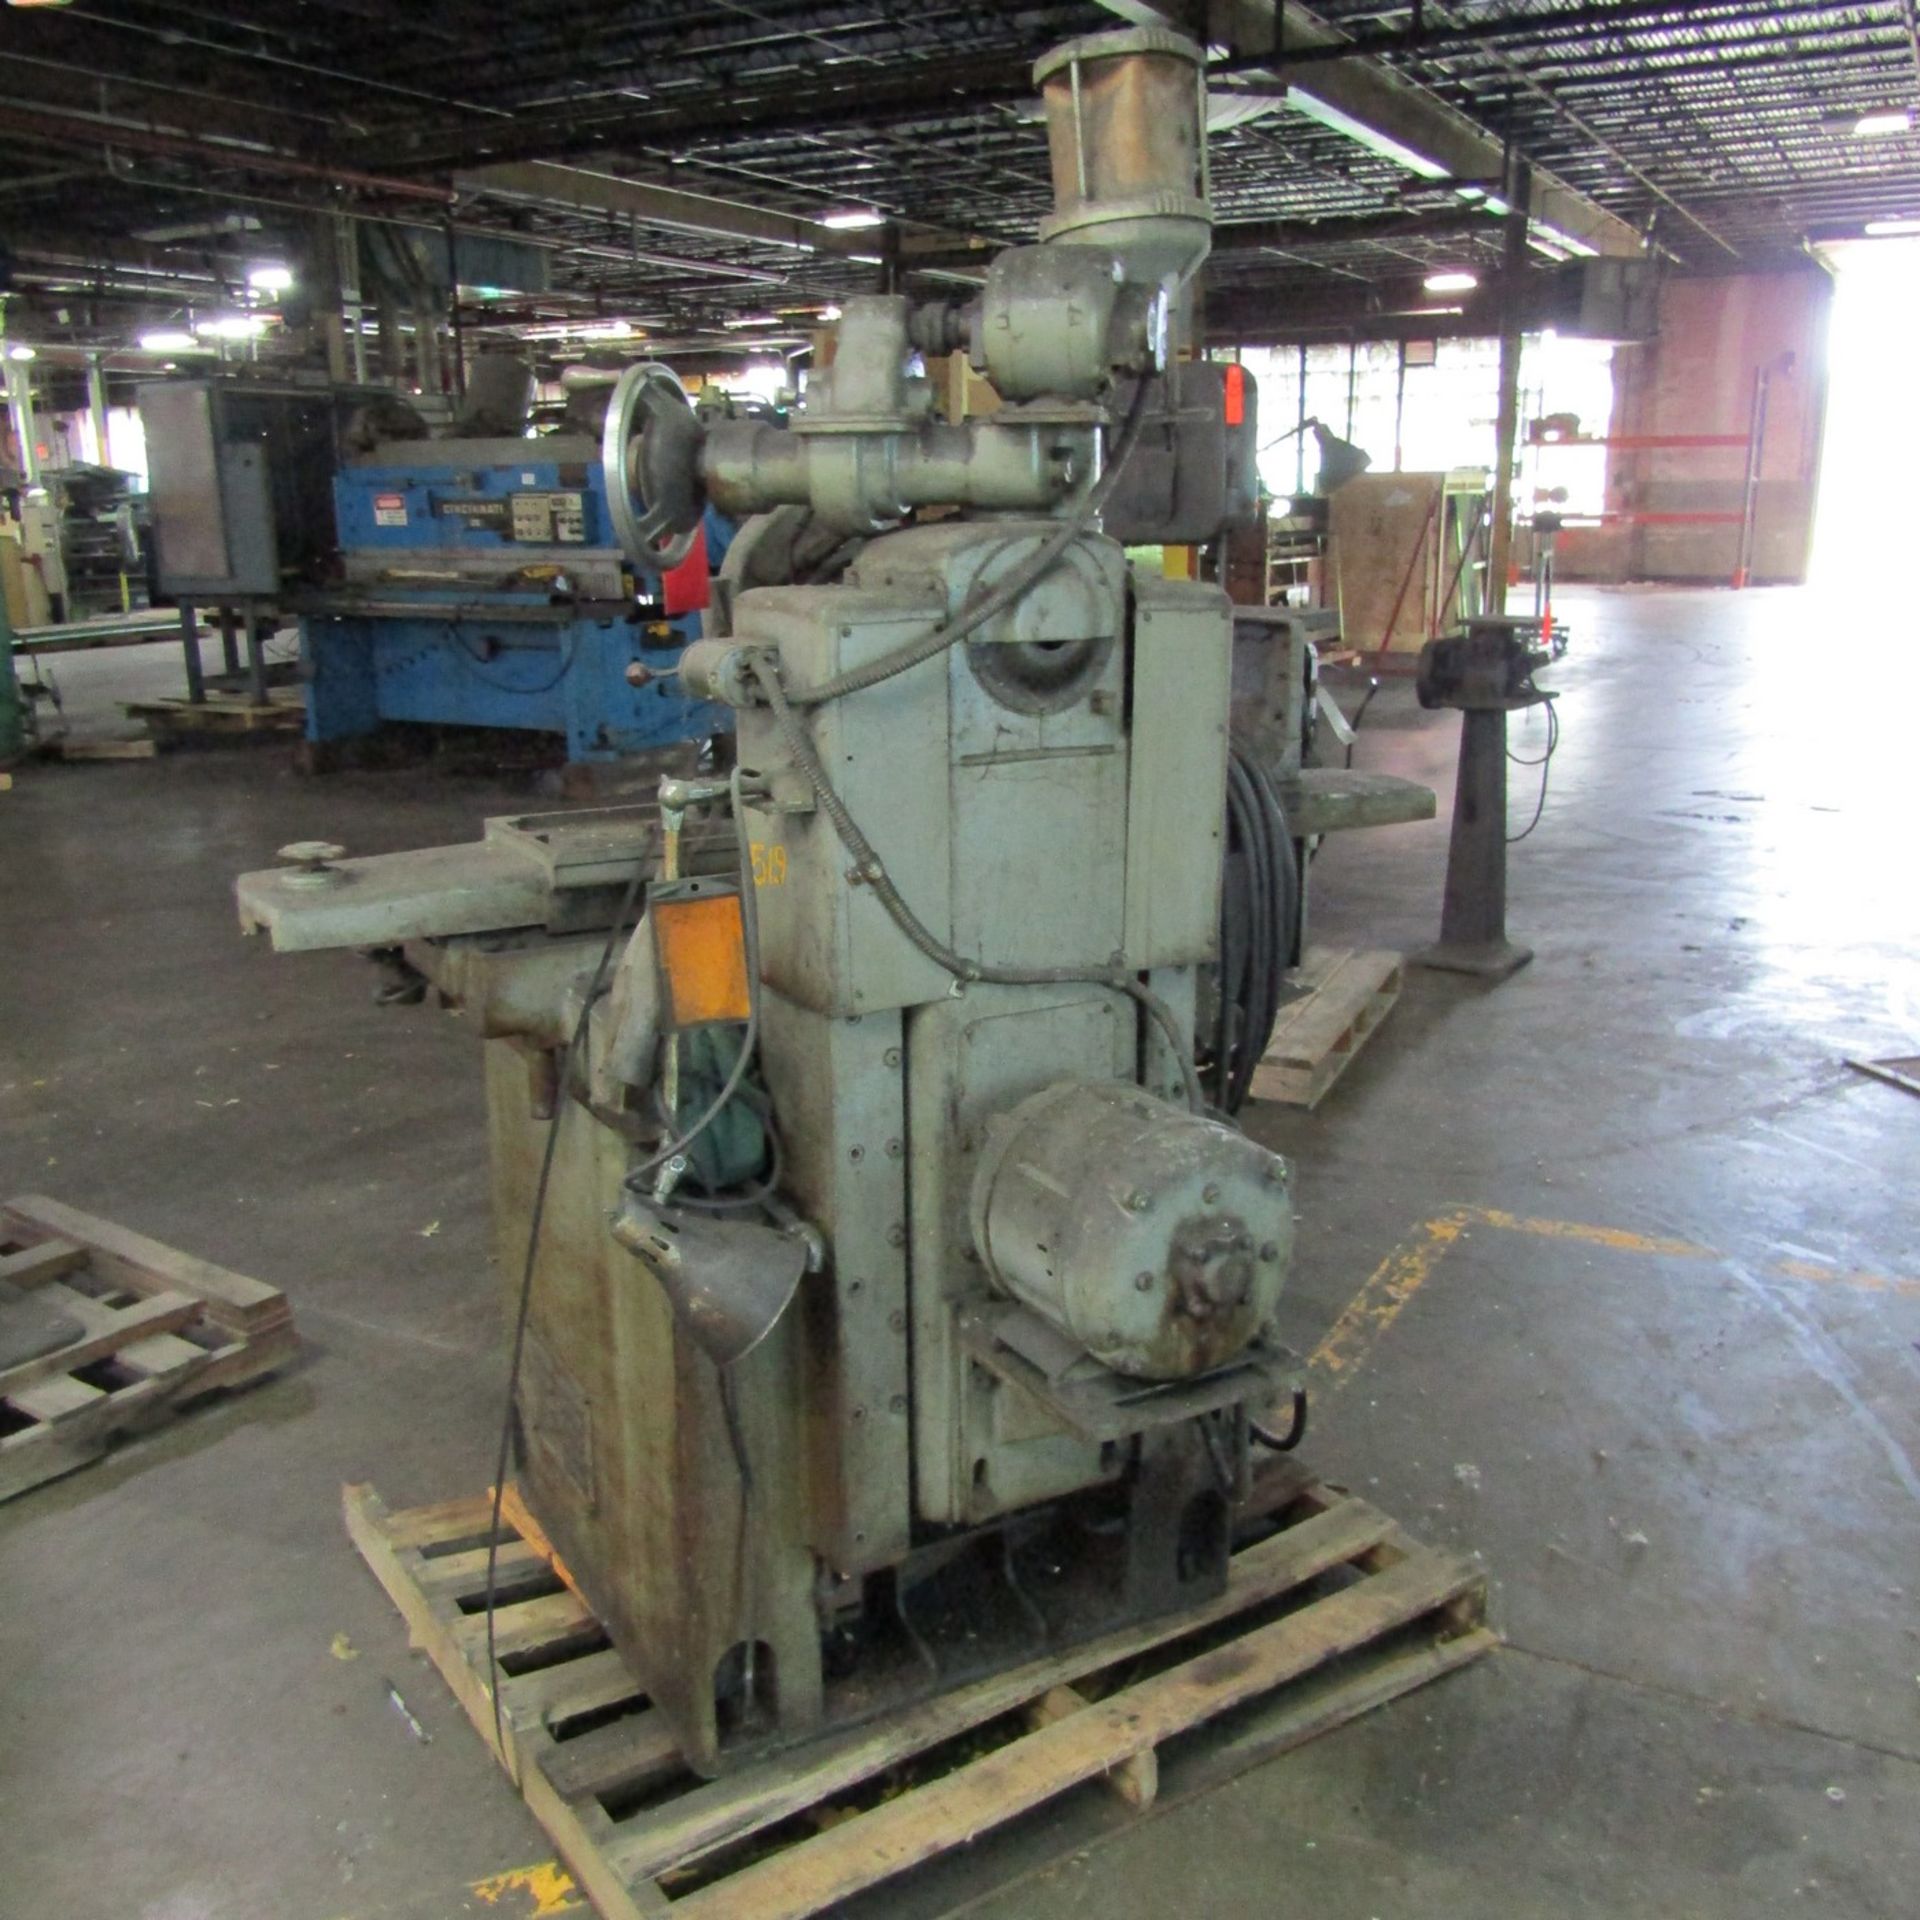 DoAll 6 in. x 18 in. Model G-10 Surface Grinder, S/N: G10C51423; (Ref. #: 519(1570)) - Image 4 of 4